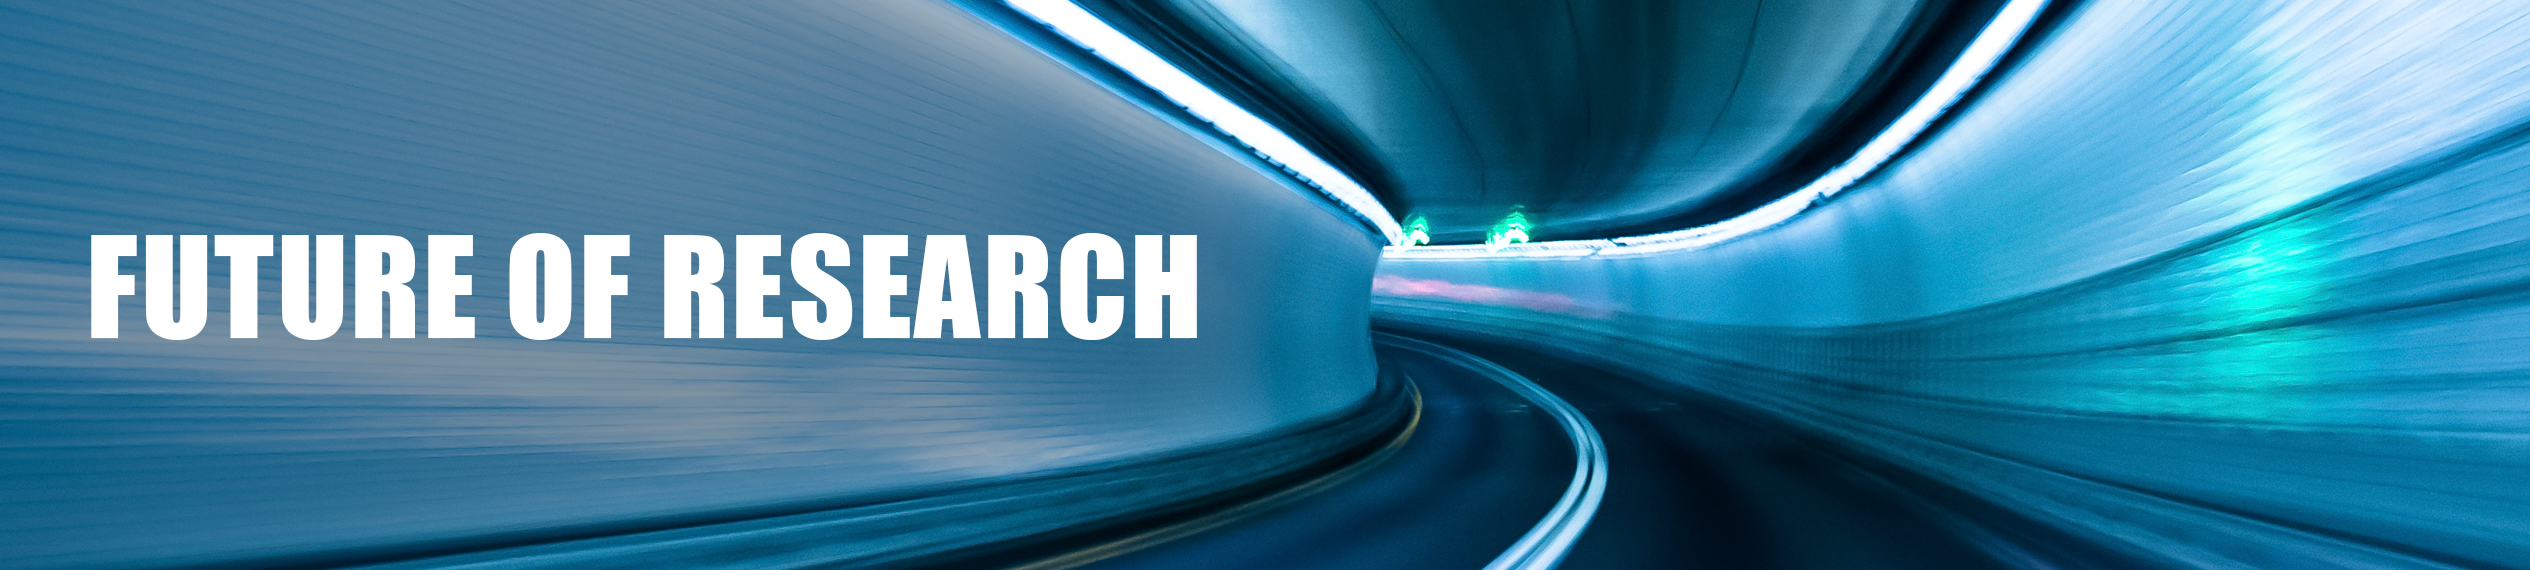 Future of Research banner with imagery of a winding road in a tunnel